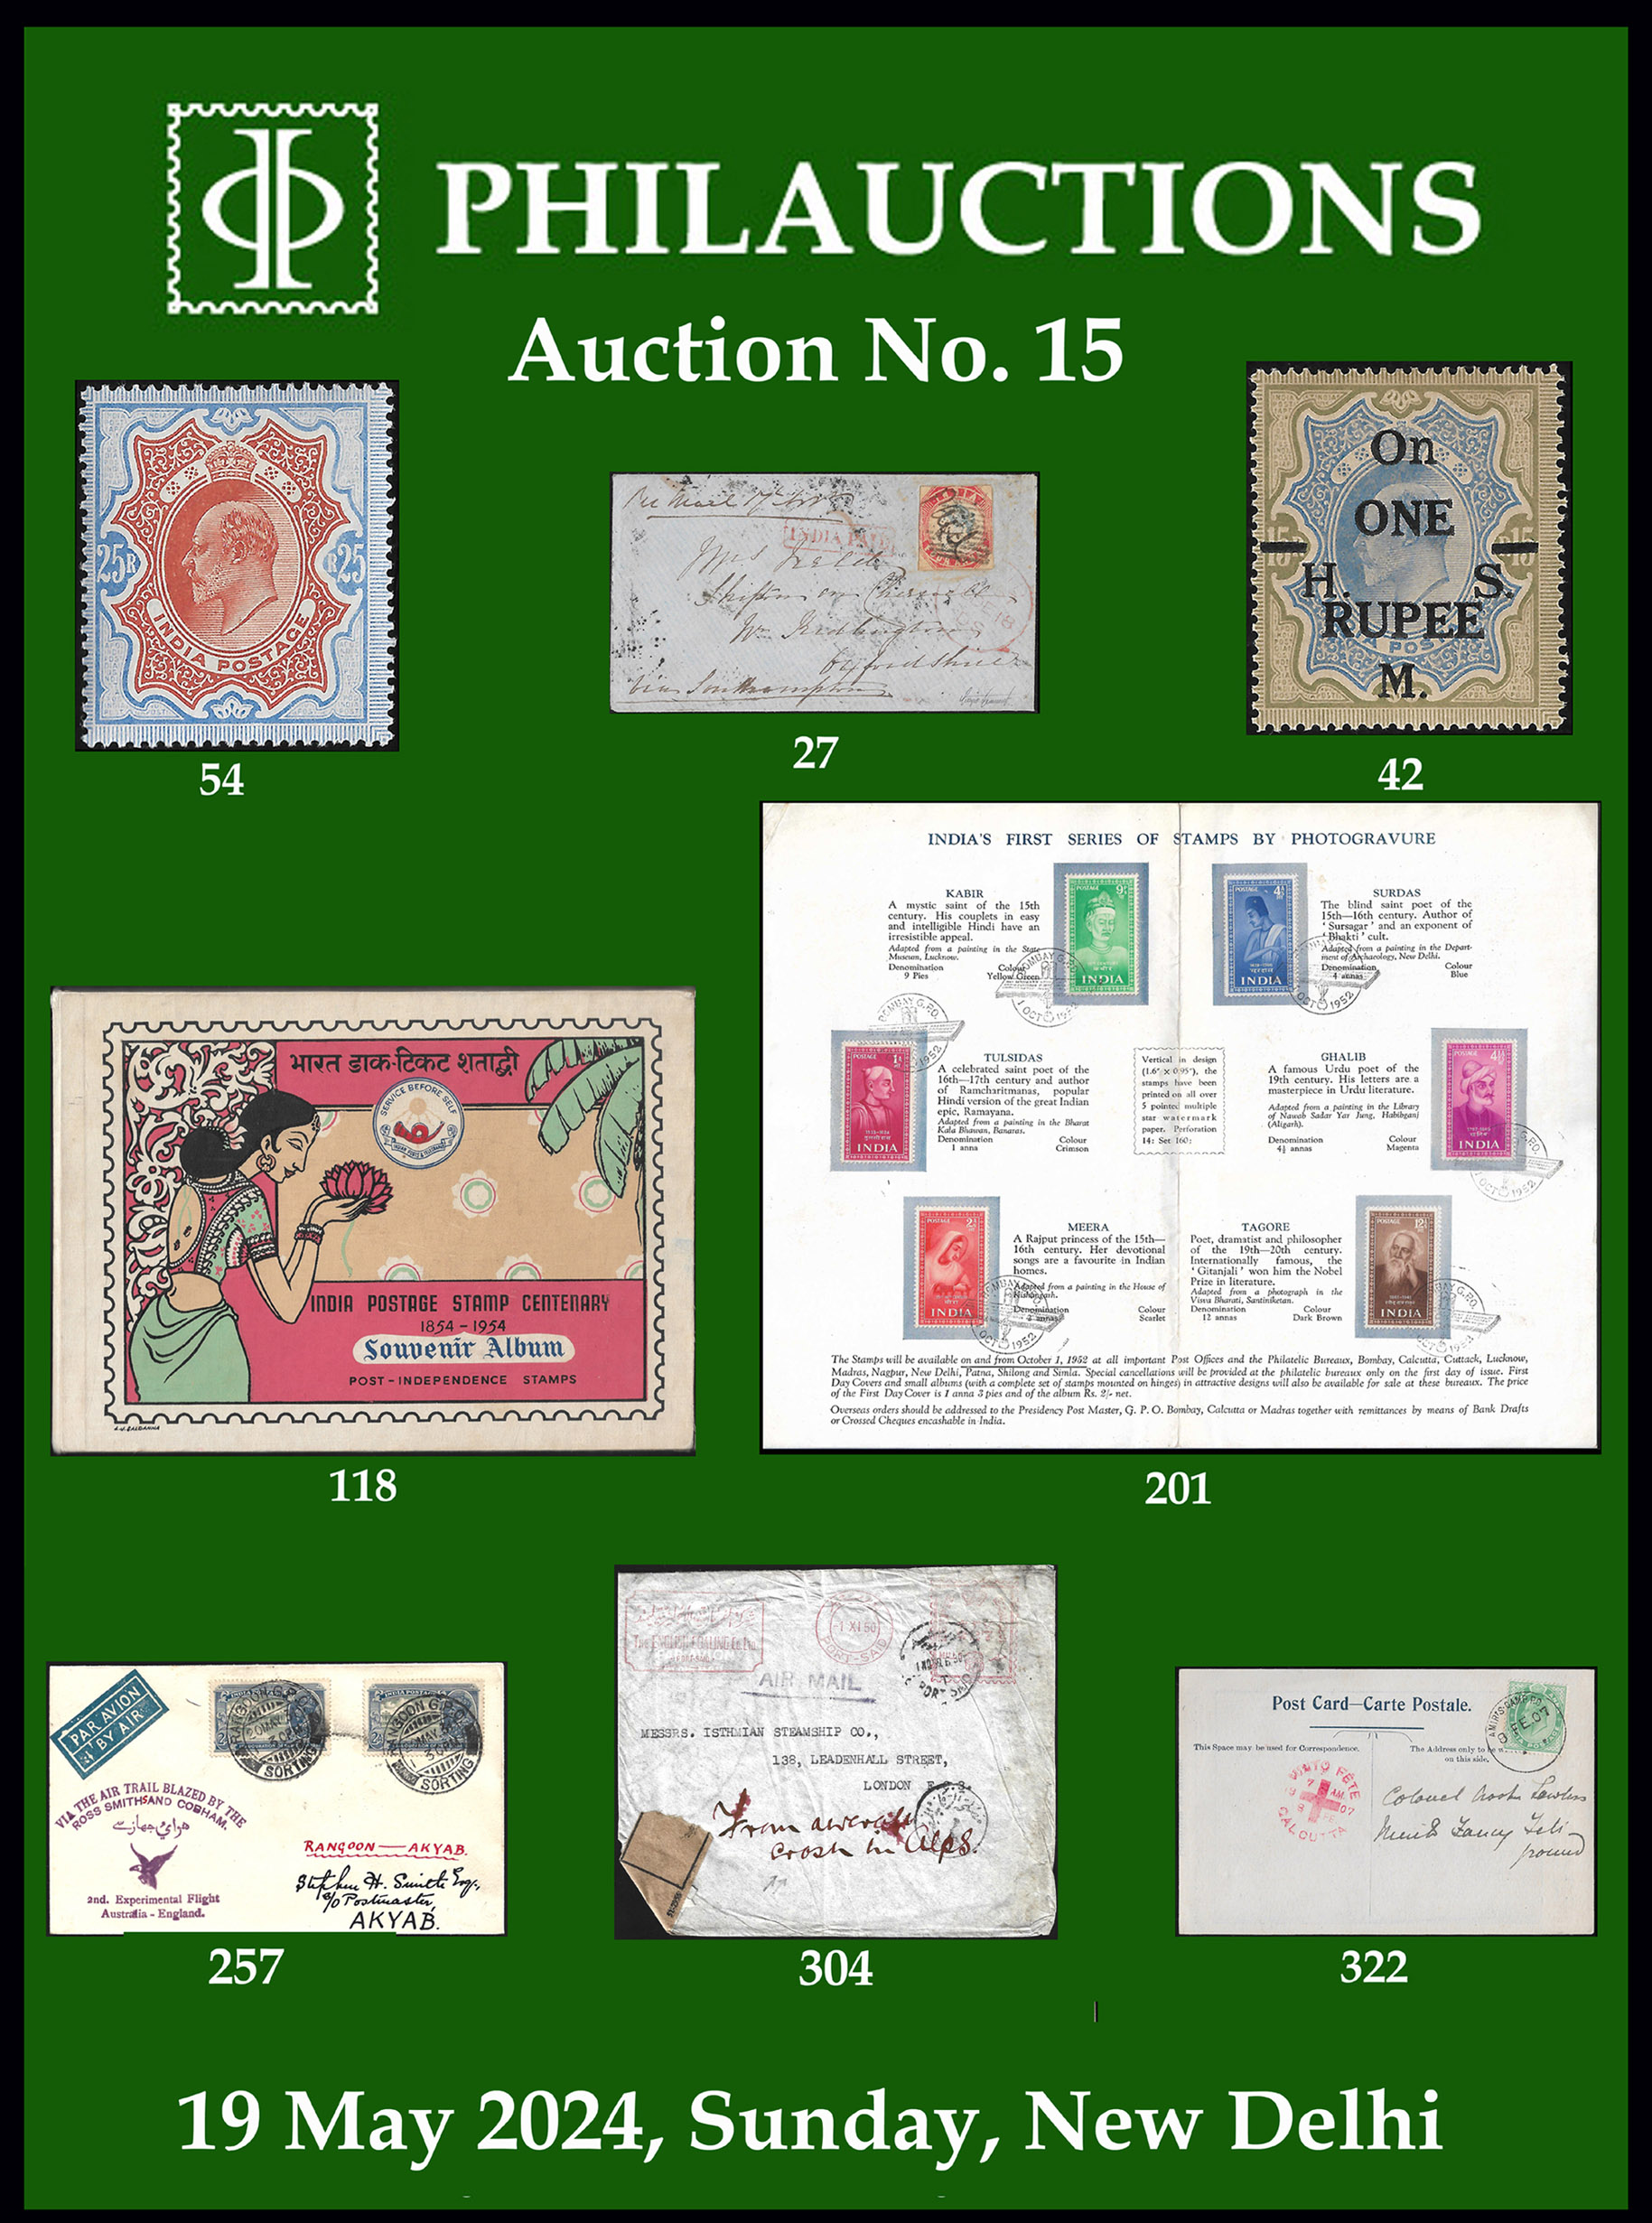 Philauctions Stamp